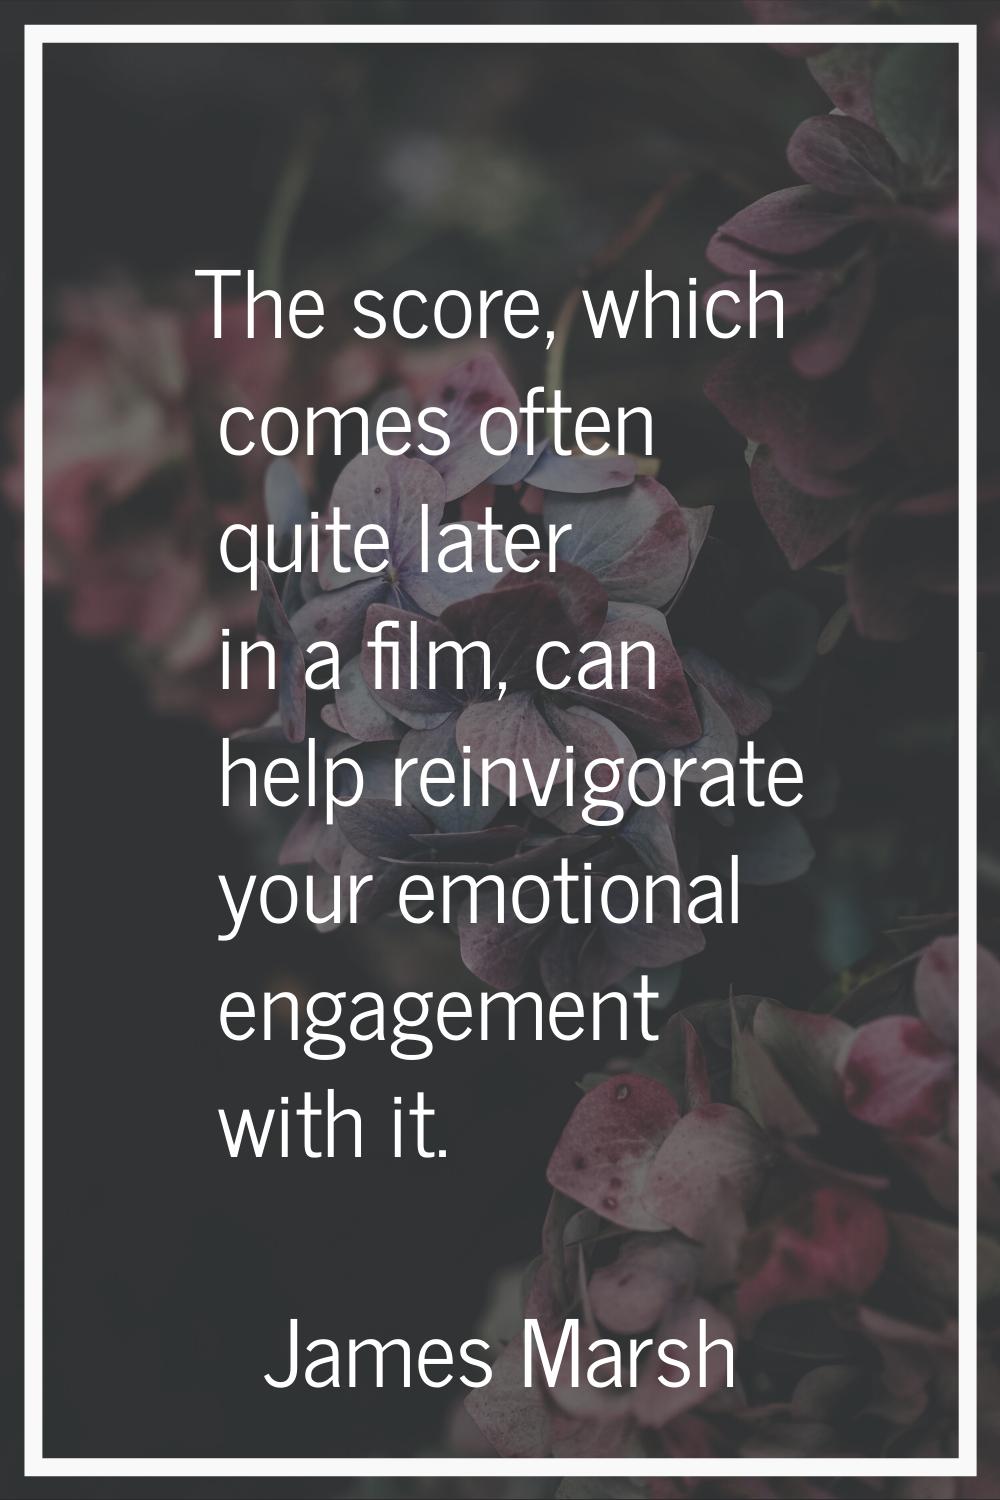 The score, which comes often quite later in a film, can help reinvigorate your emotional engagement